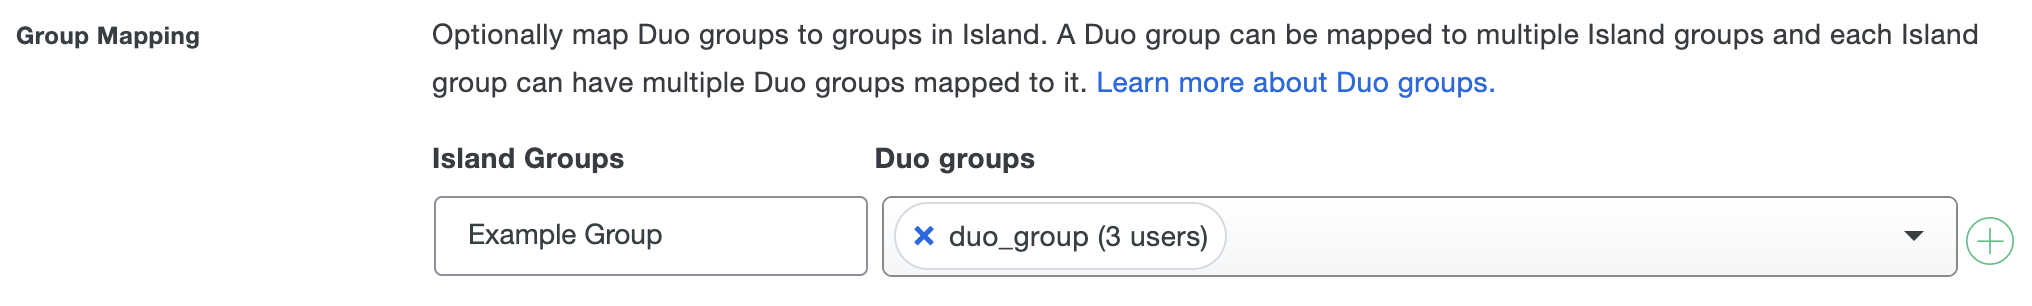 Duo Island Group Mapping Fields